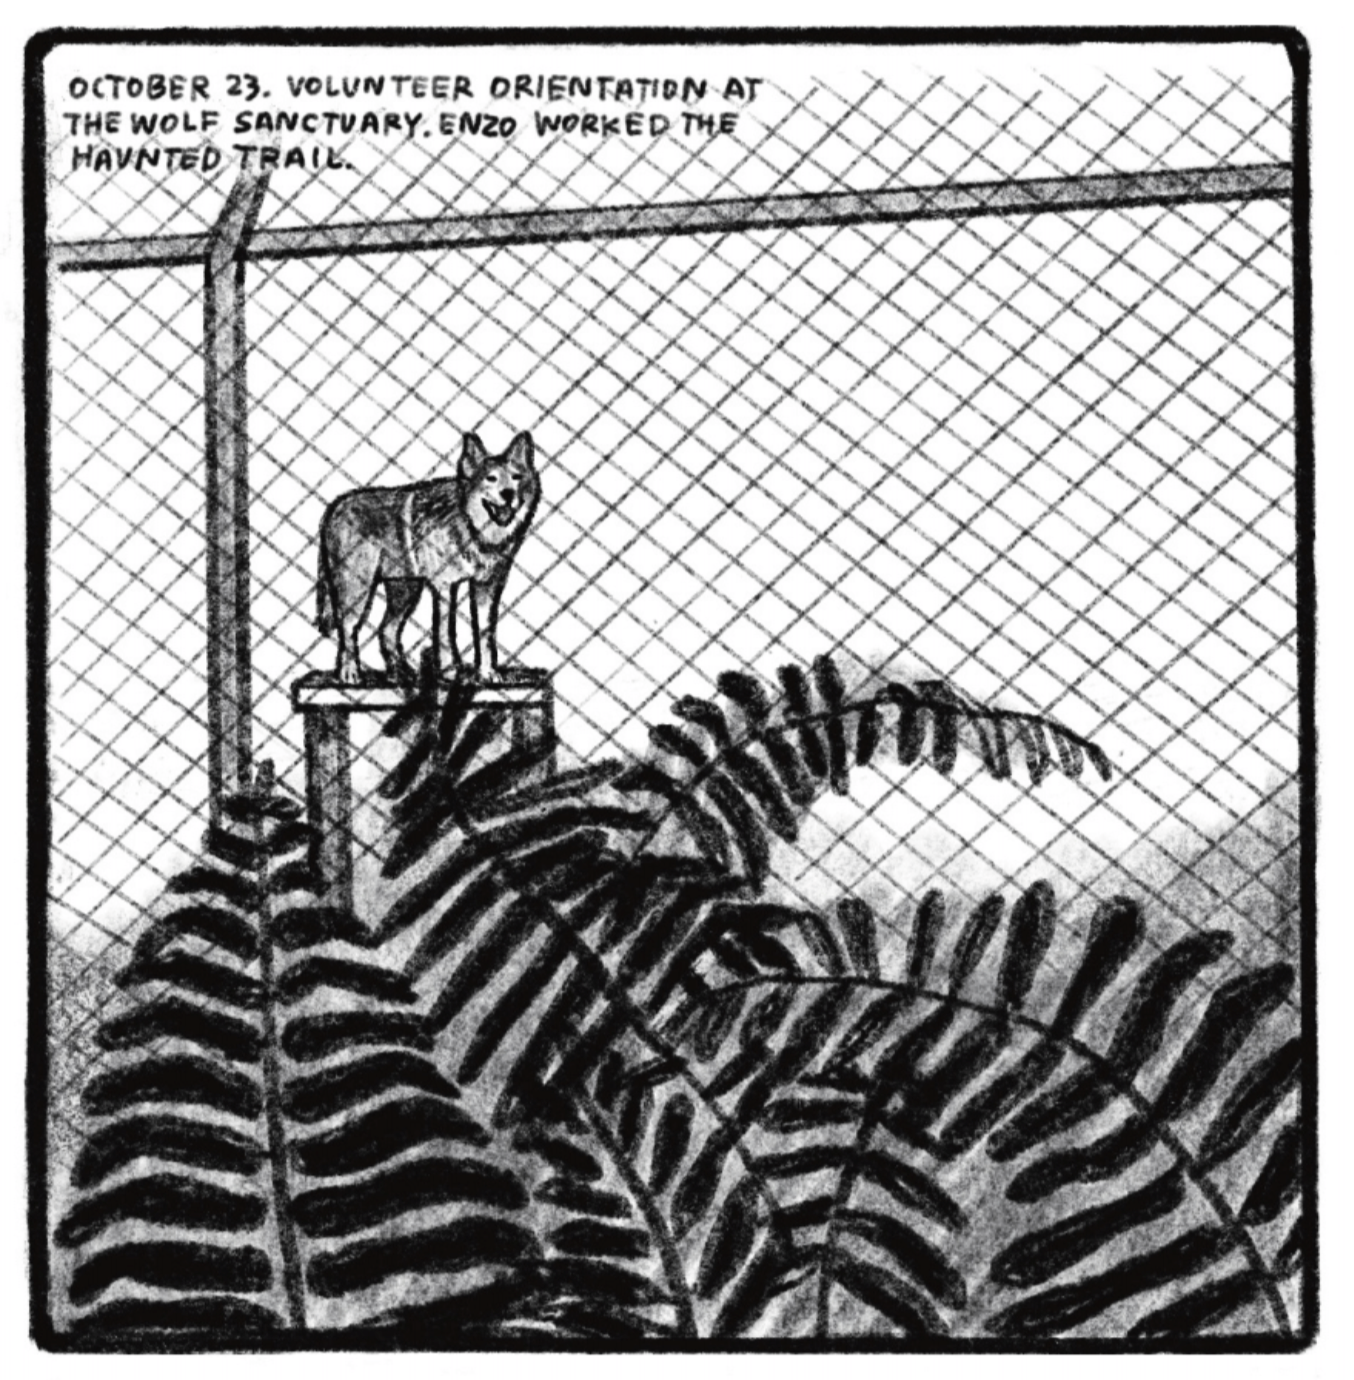 A wolf is standing on a ledge inside a fenced-in enclosure outside. Large fern leaves in the foreground cover the bottom half of the panel. â€œOctober 23. Volunteer orientation at the wolf sanctuary. Enzo worked the haunted trail.â€